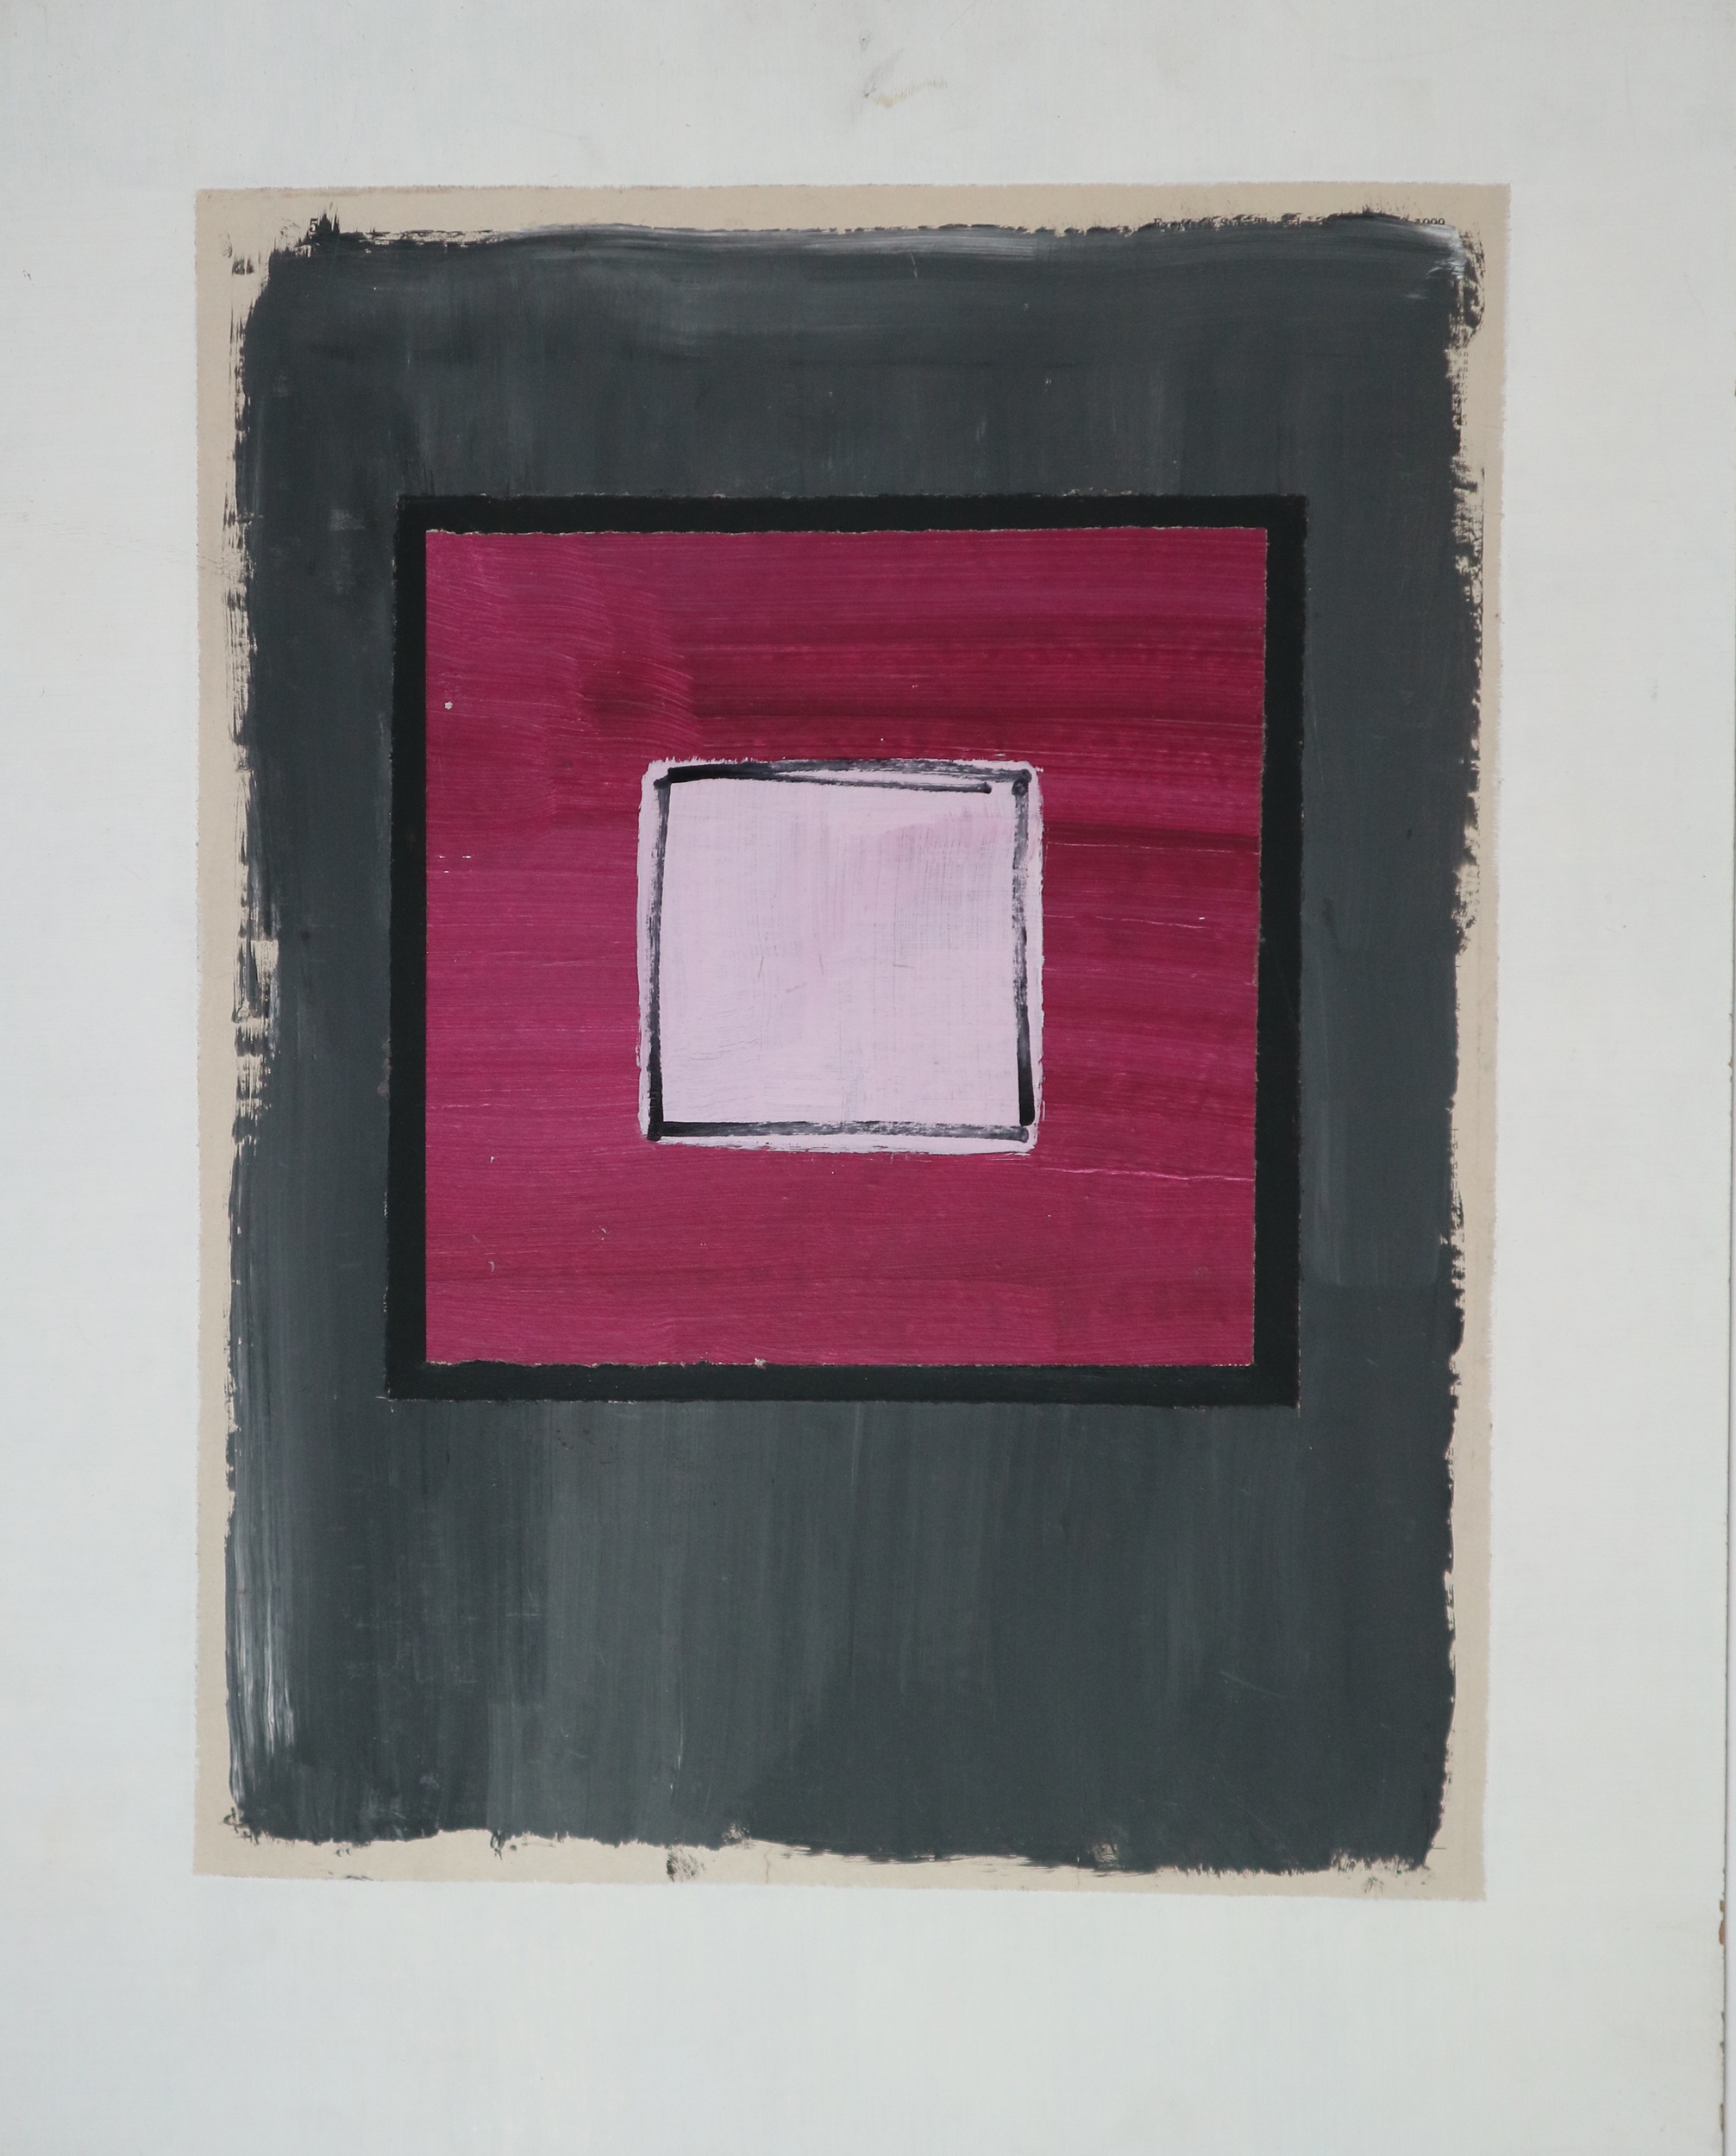 George Holt (British 1924-2005), Four Mixed Media Abstract Works with square forms, mixed media on